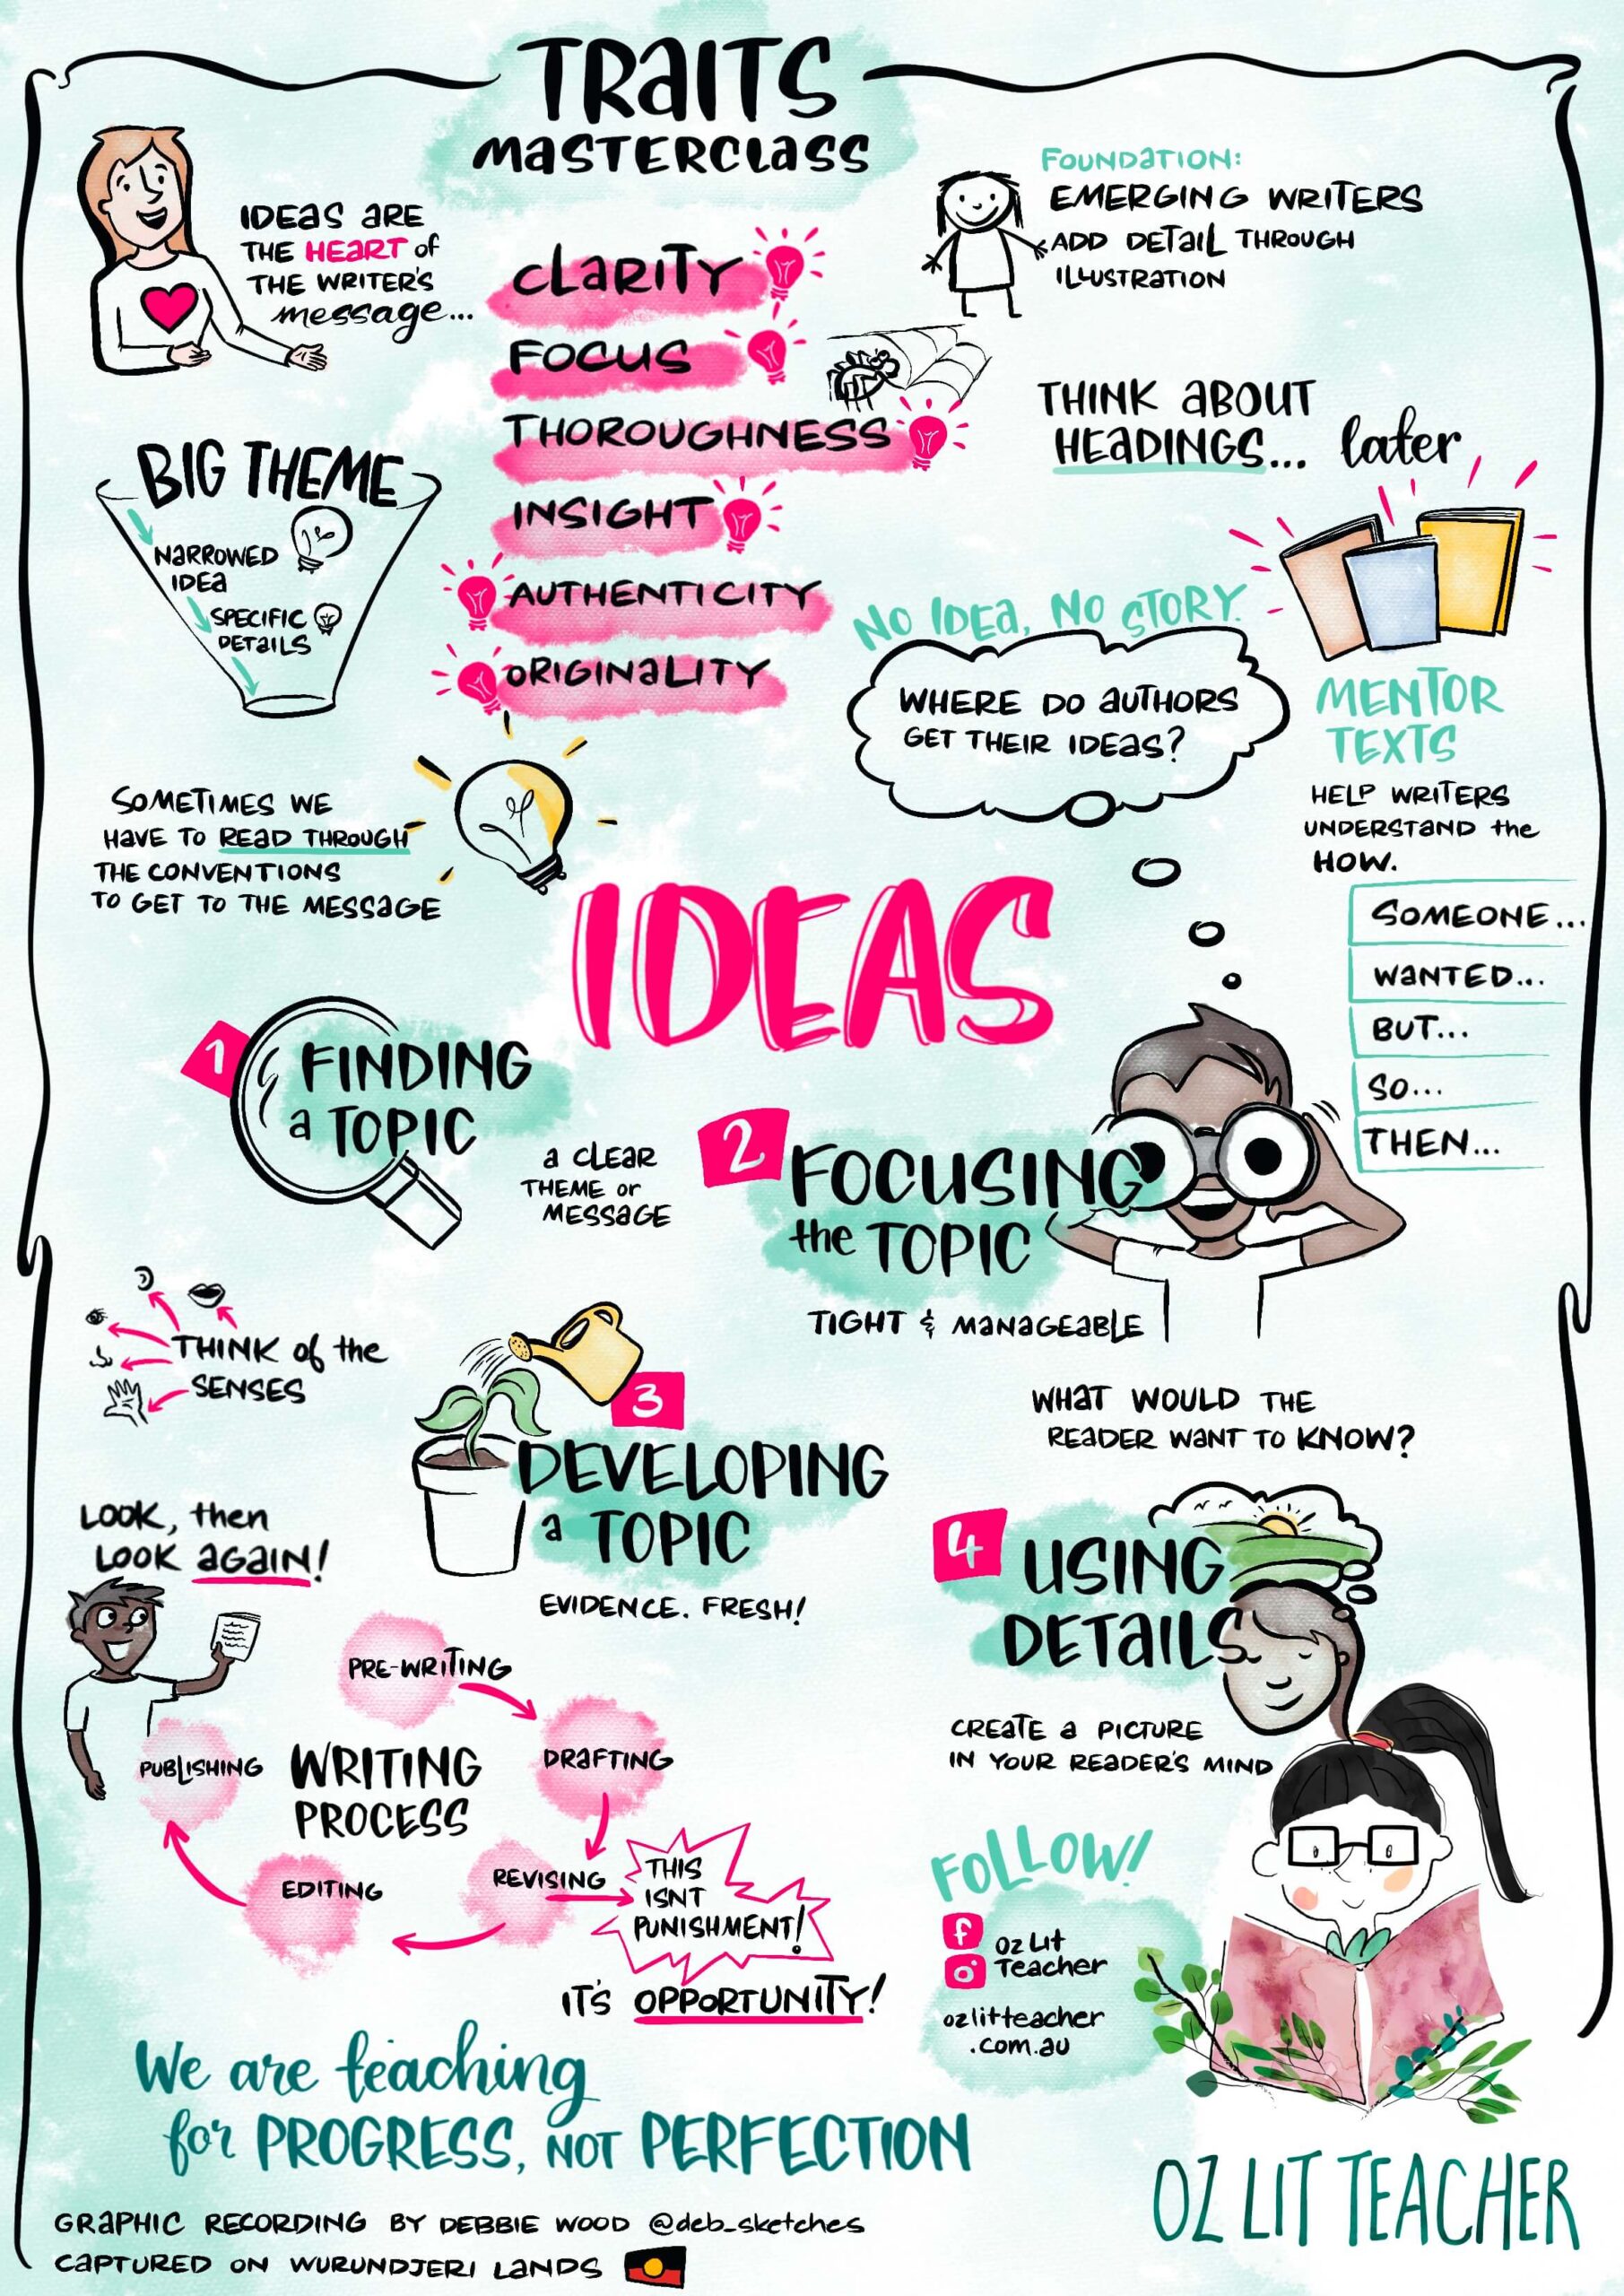 Graphic recording of a webinar on IDEAS, one of the six writing traits that teachers work on in the Primary Curriculum.